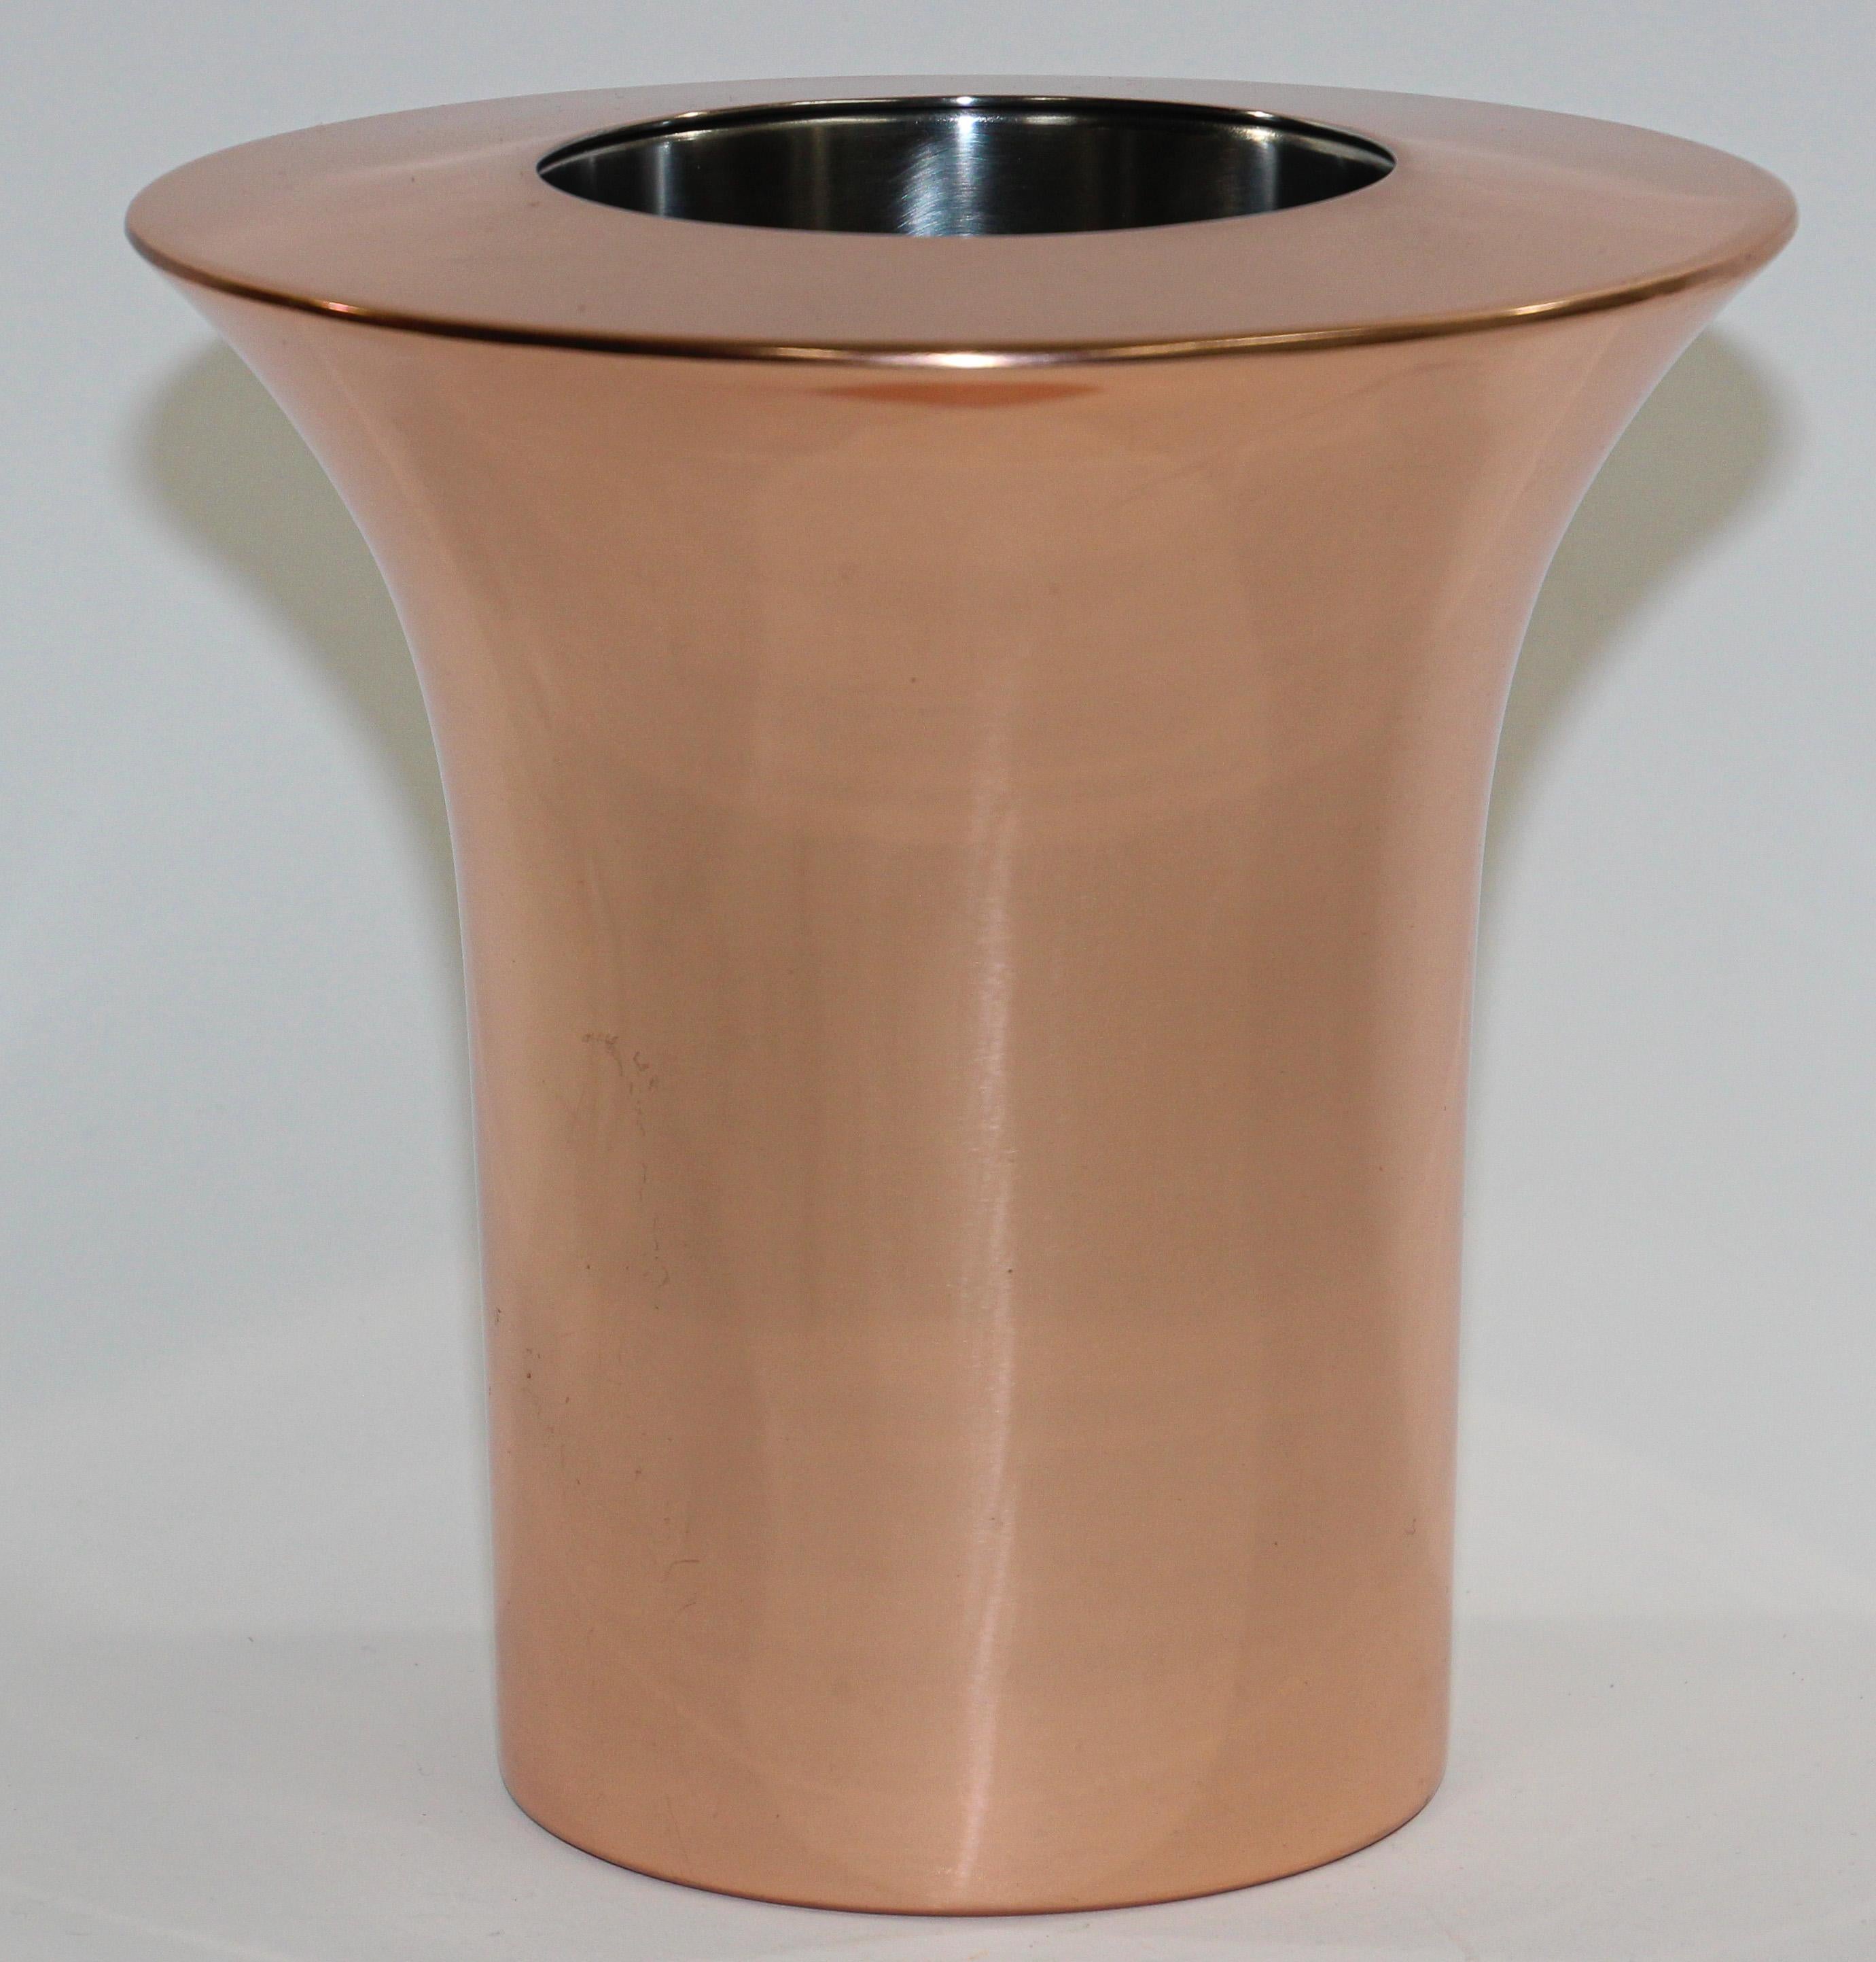 Modernist bar copper wine cooler or ice bucket by Tom Dixon London.
Great modernist design wine cooler will add style in any bar display.
Use it with your favorite wine or champagne to chill in this Tom Dixon's 'Plum' copper-plated cooler. 
An